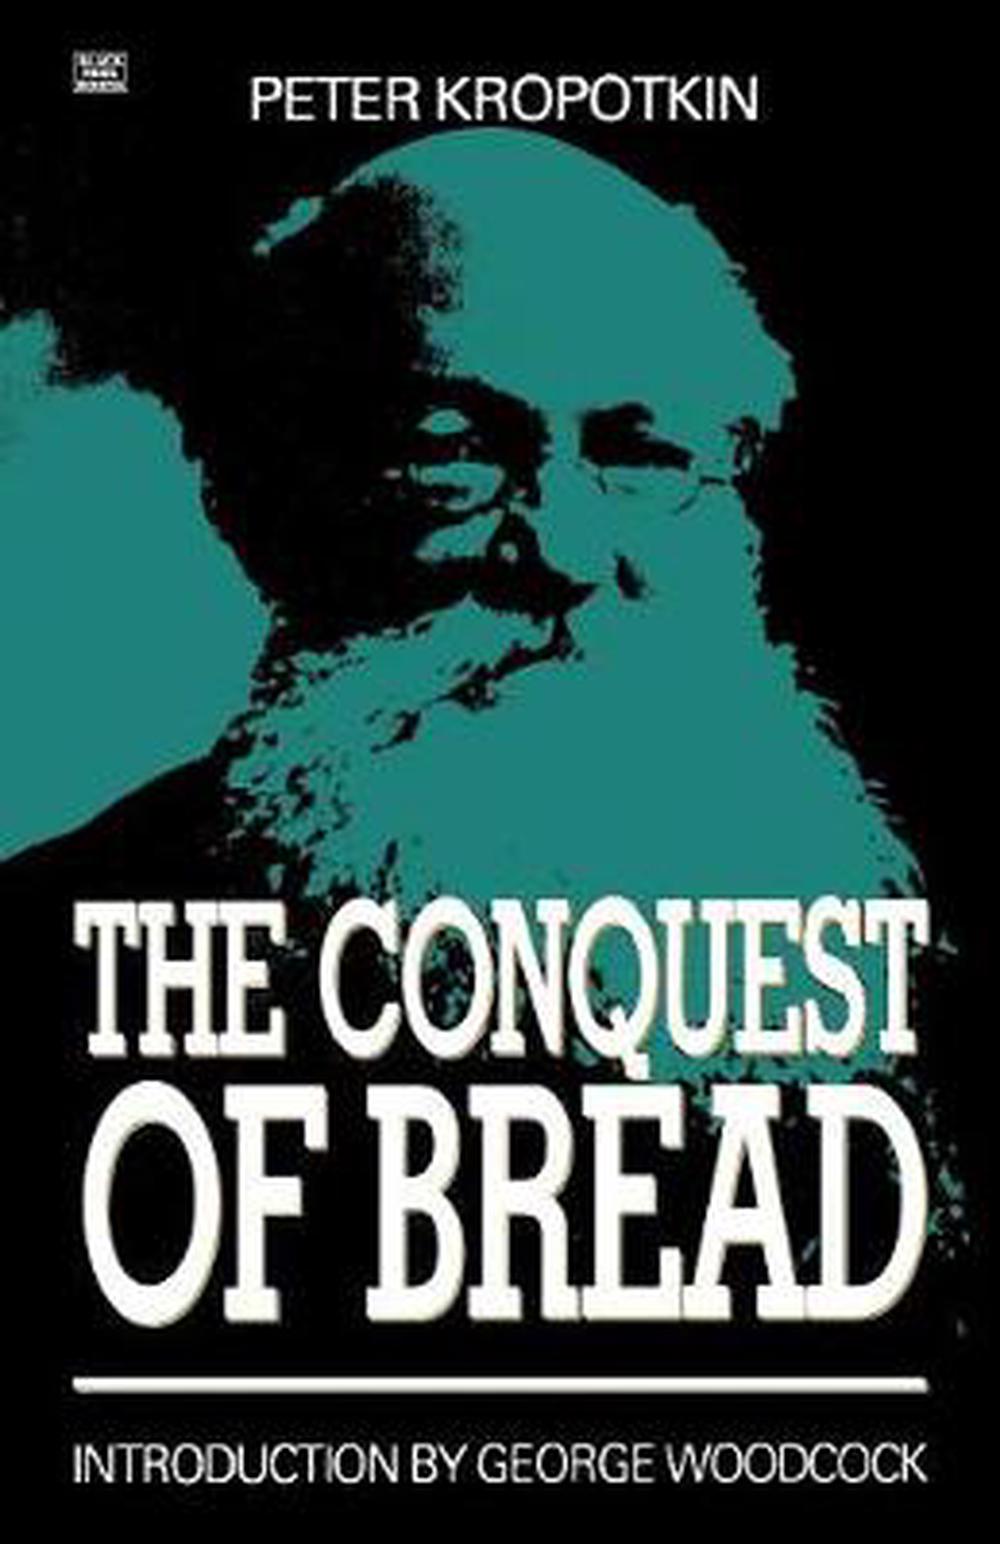 The Conquest of Bread by Pyotr Kropotkin